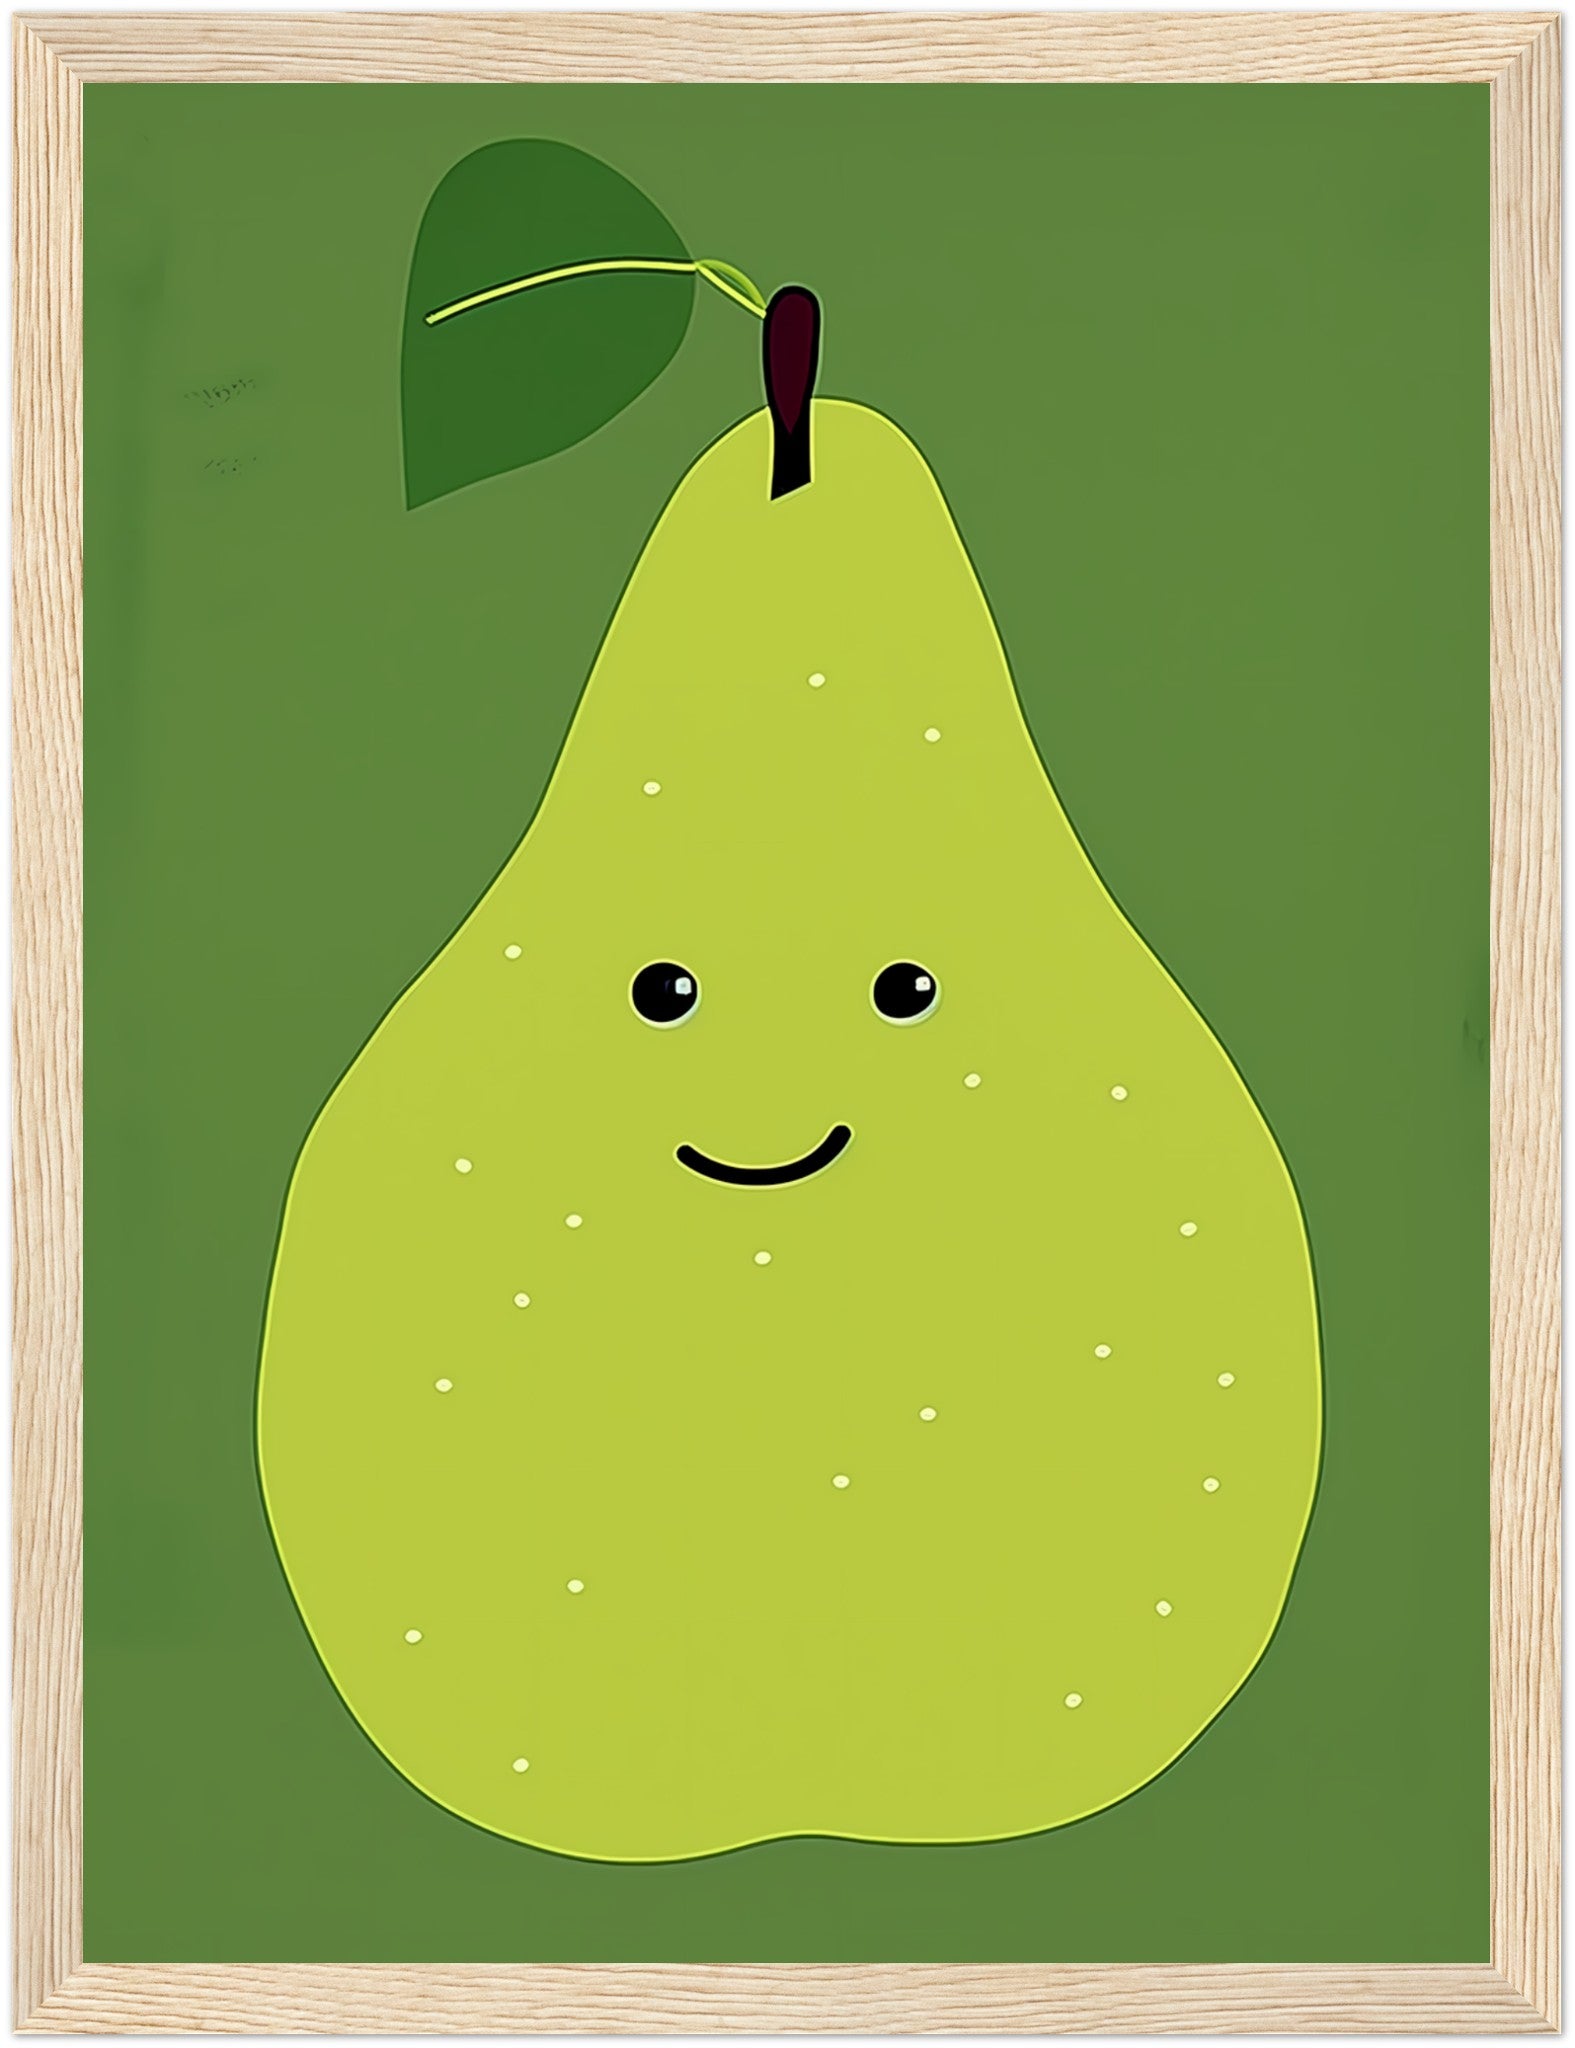 A framed illustration of a smiling pear with a leaf and stem.